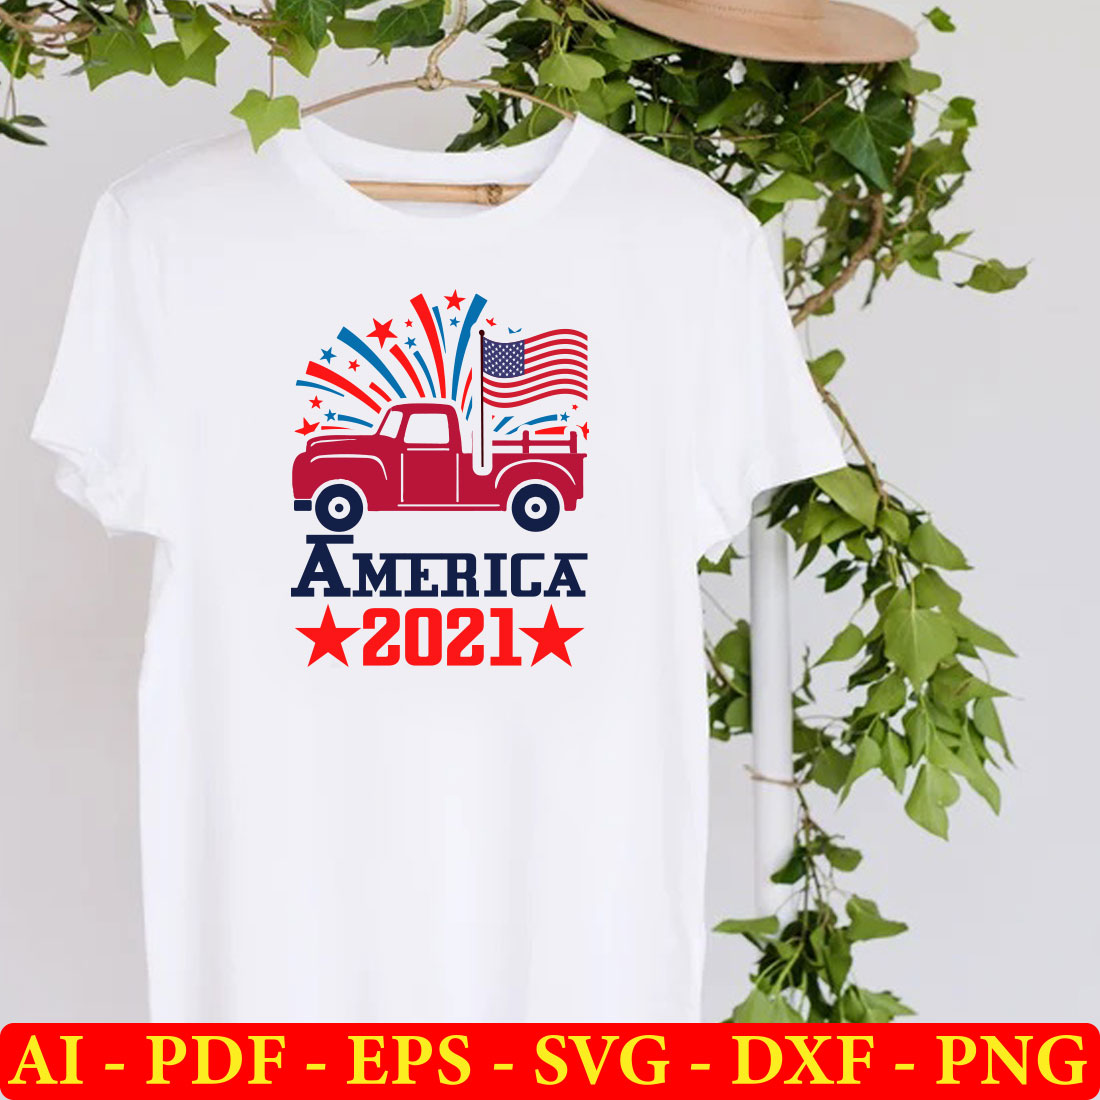 T - shirt with an american truck and stars on it.